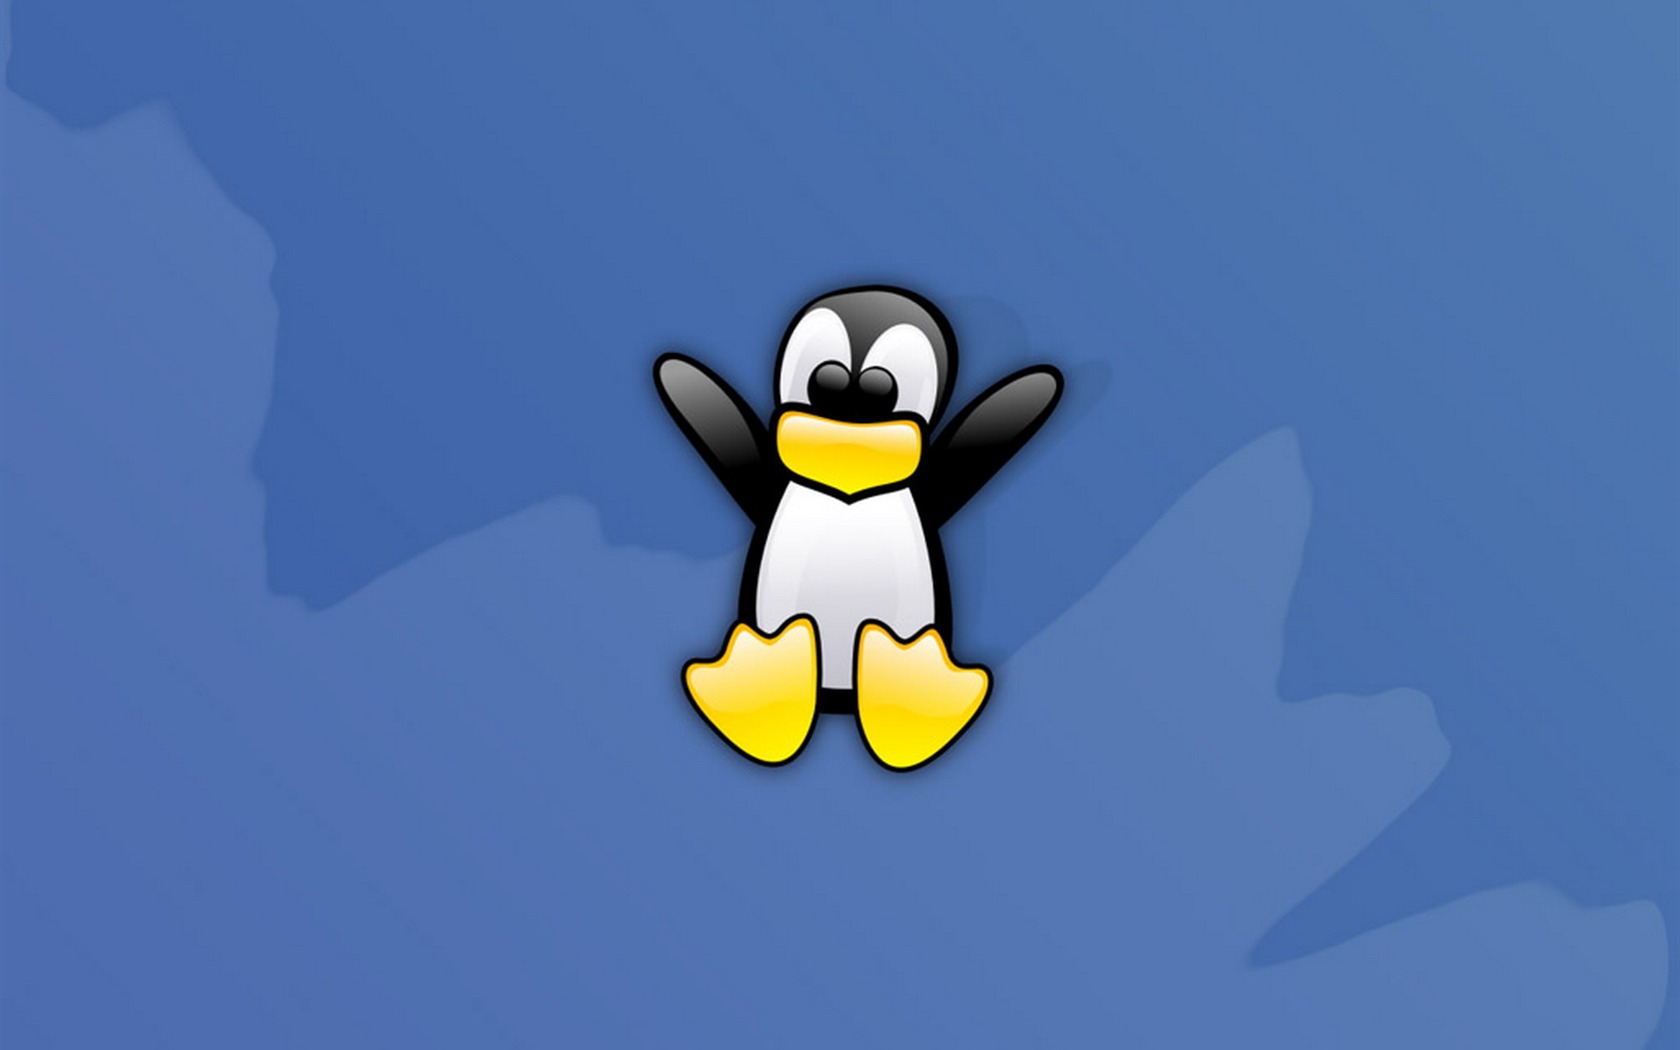 Linux tapety (2) #18 - 1680x1050